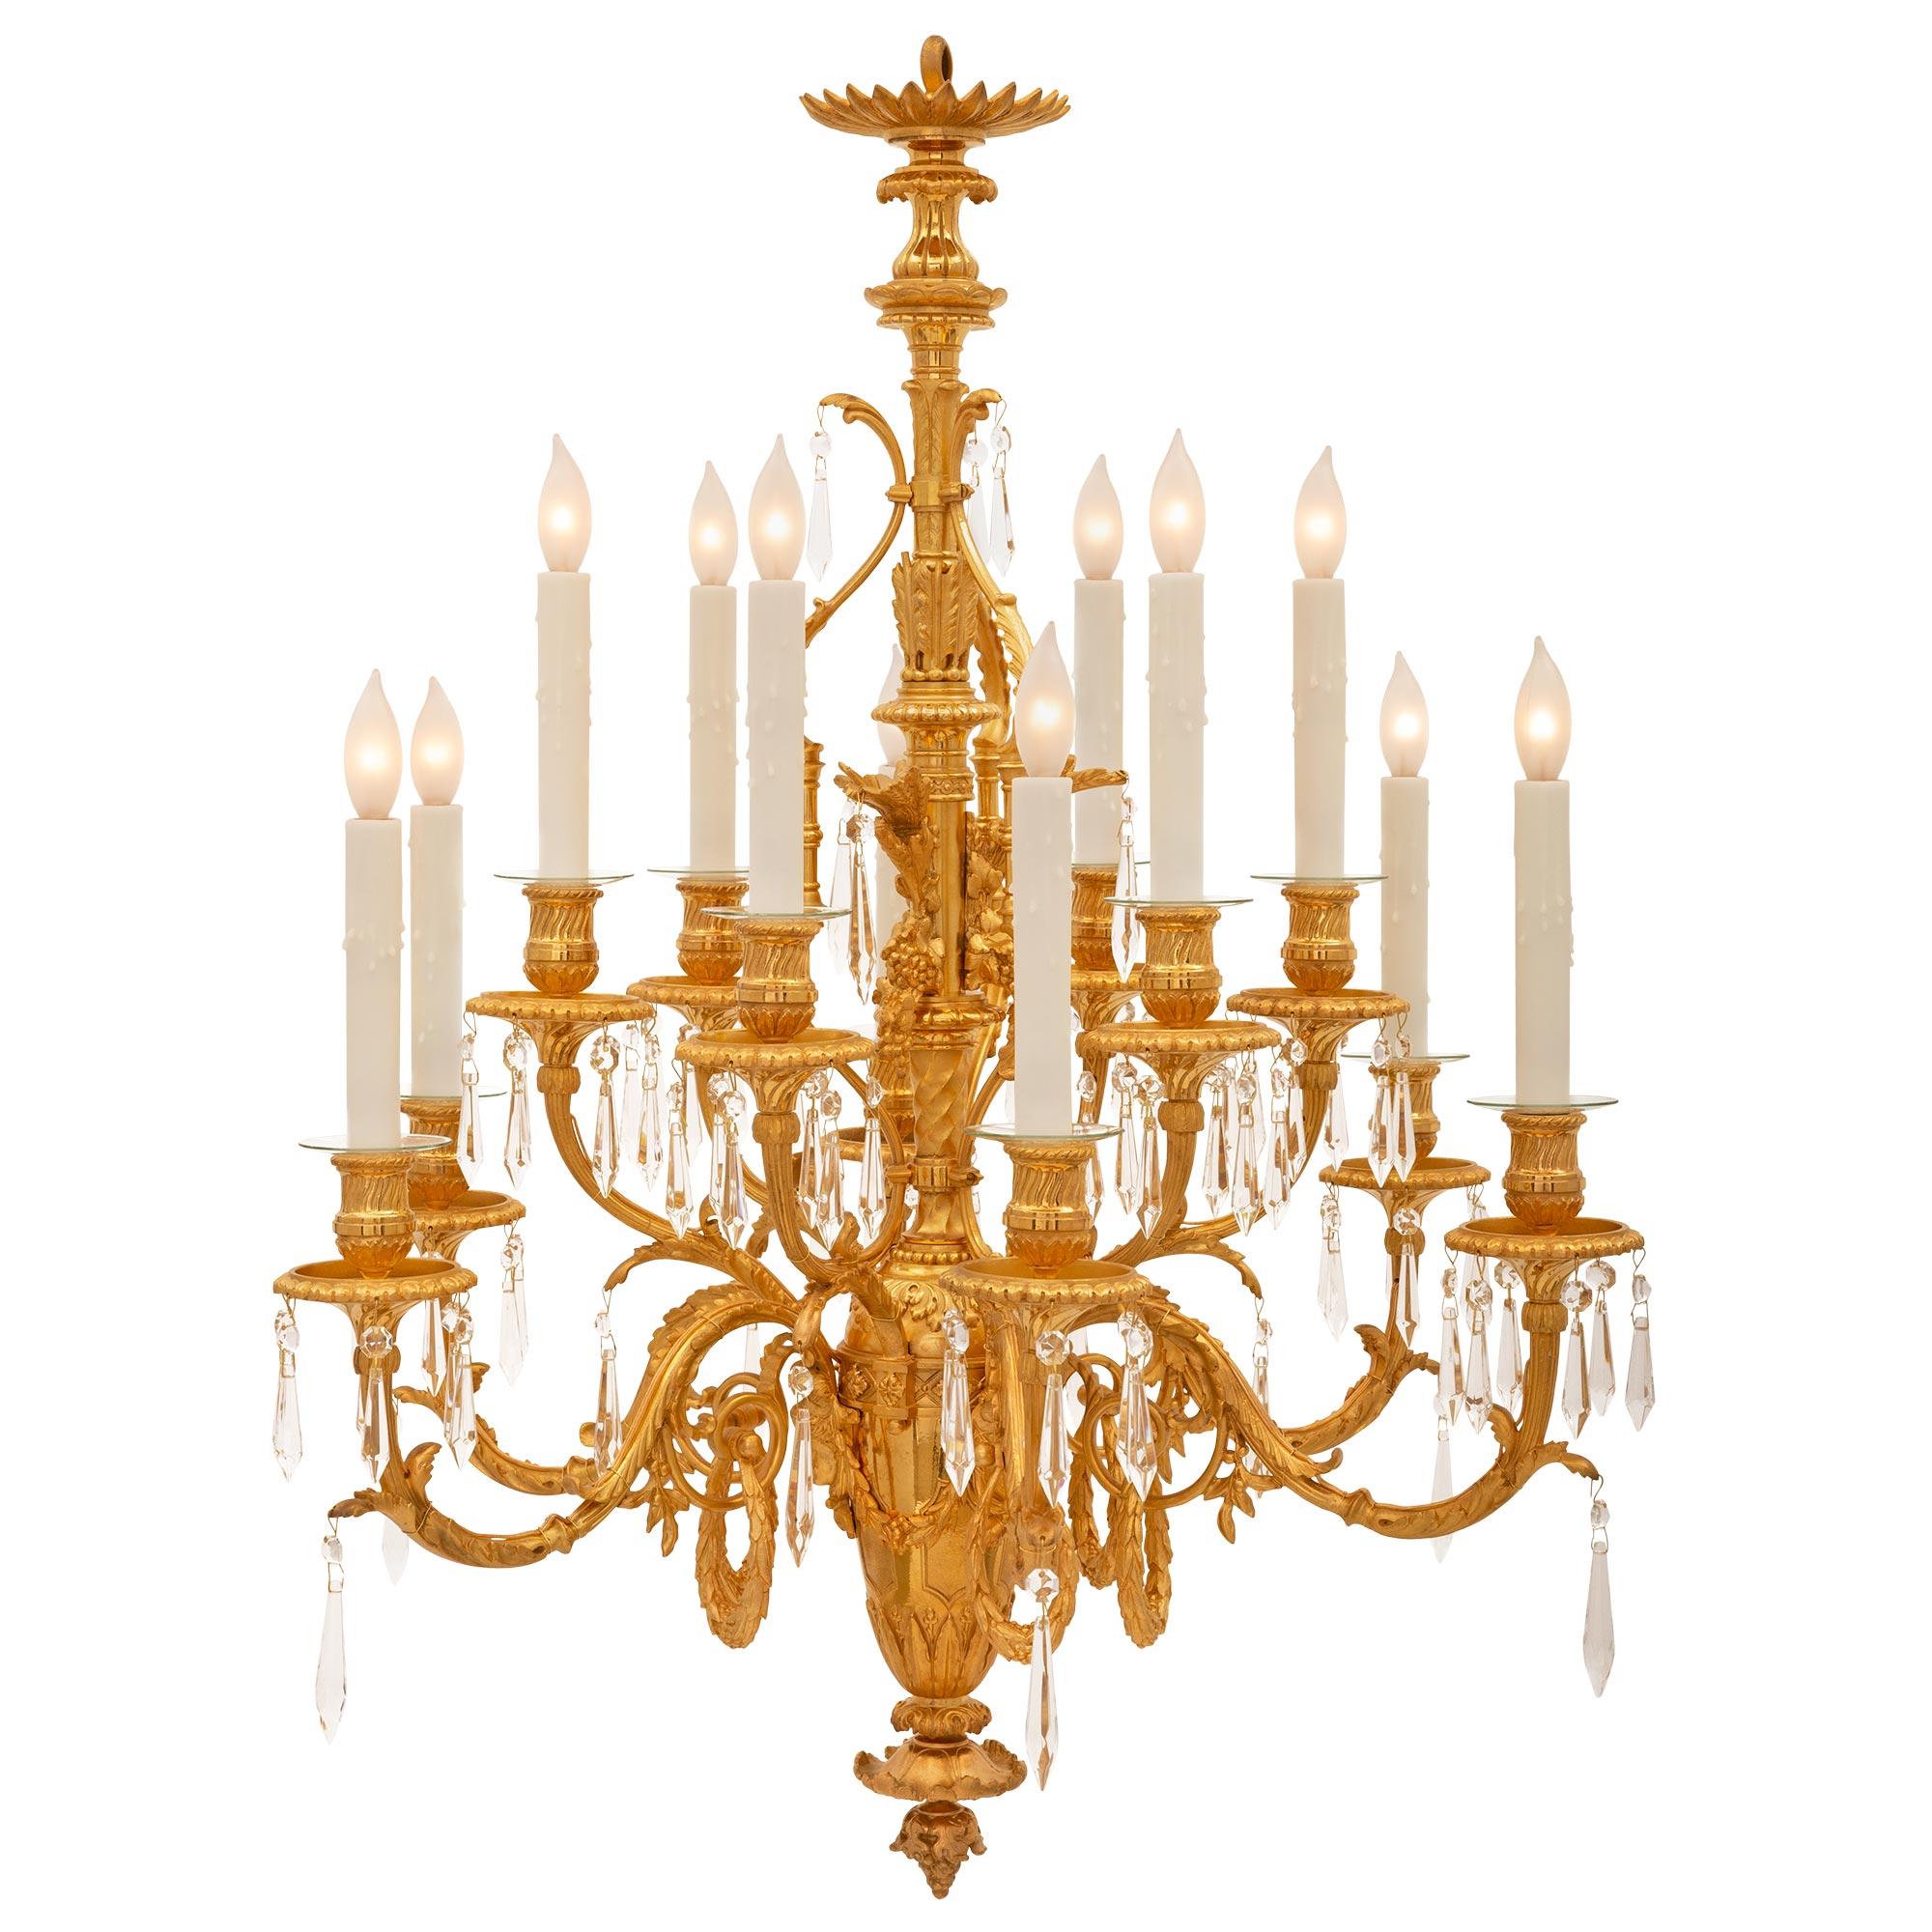 A stunning French 19th century Louis XVI st. ormolu and Baccarat crystal chandelier. The twelve arm chandelier is centered by a beautiful richly chased bottom acorn finial below lovely foliate designs and the circular tapered body. The body is